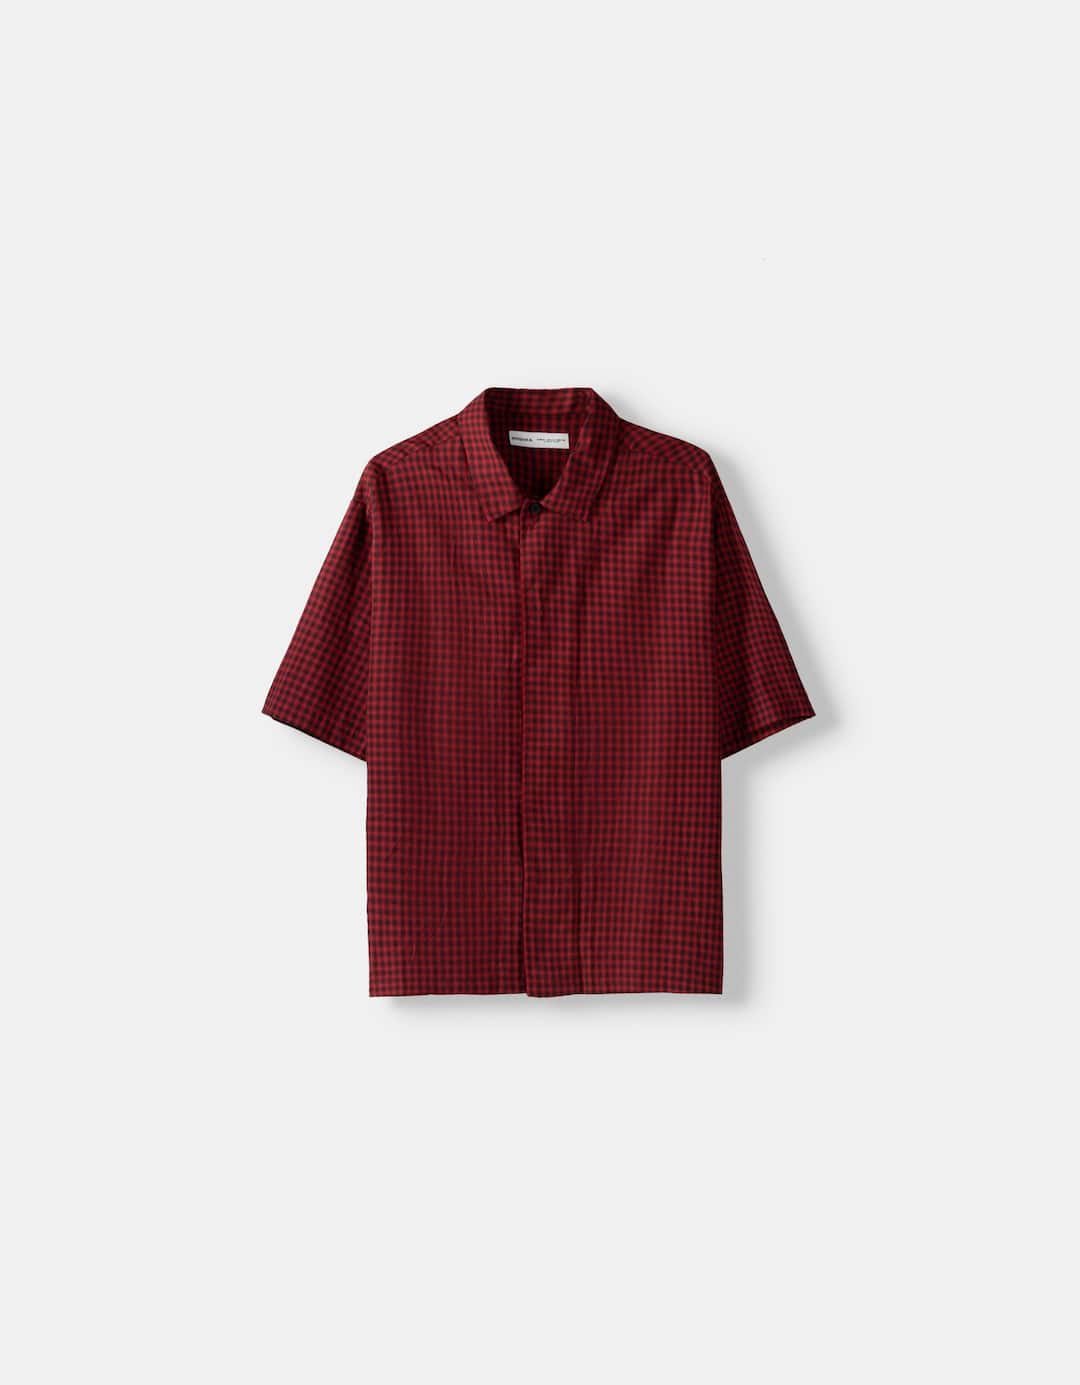 Check shirt with 3/4 length sleeves